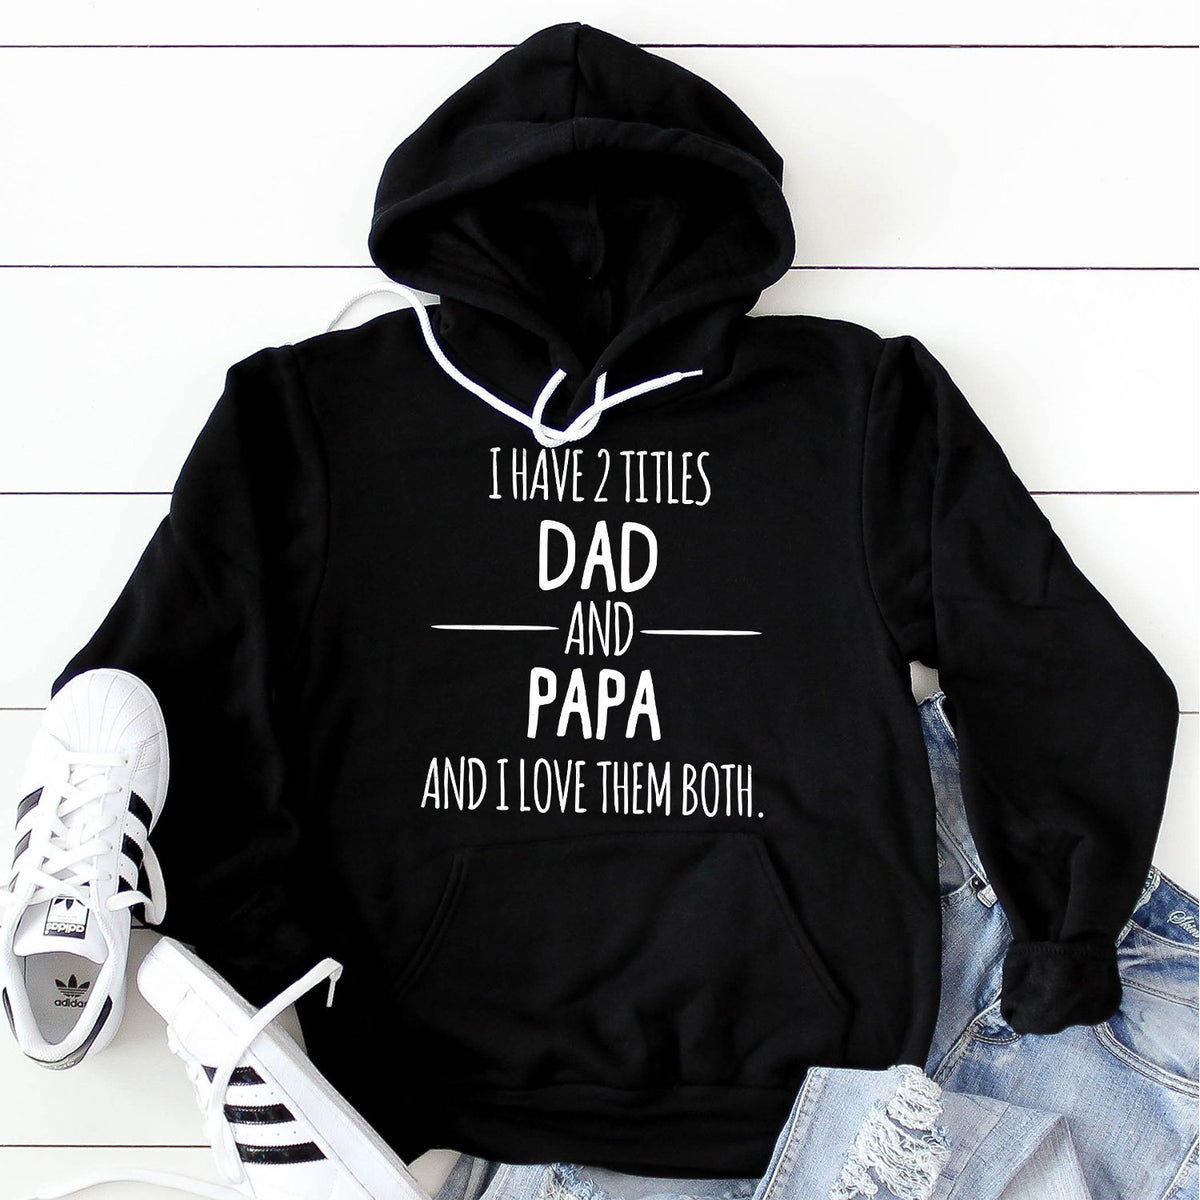 I Have 2 Titles Dad and Papa and I Love Them Both - Hoodie Sweatshirt